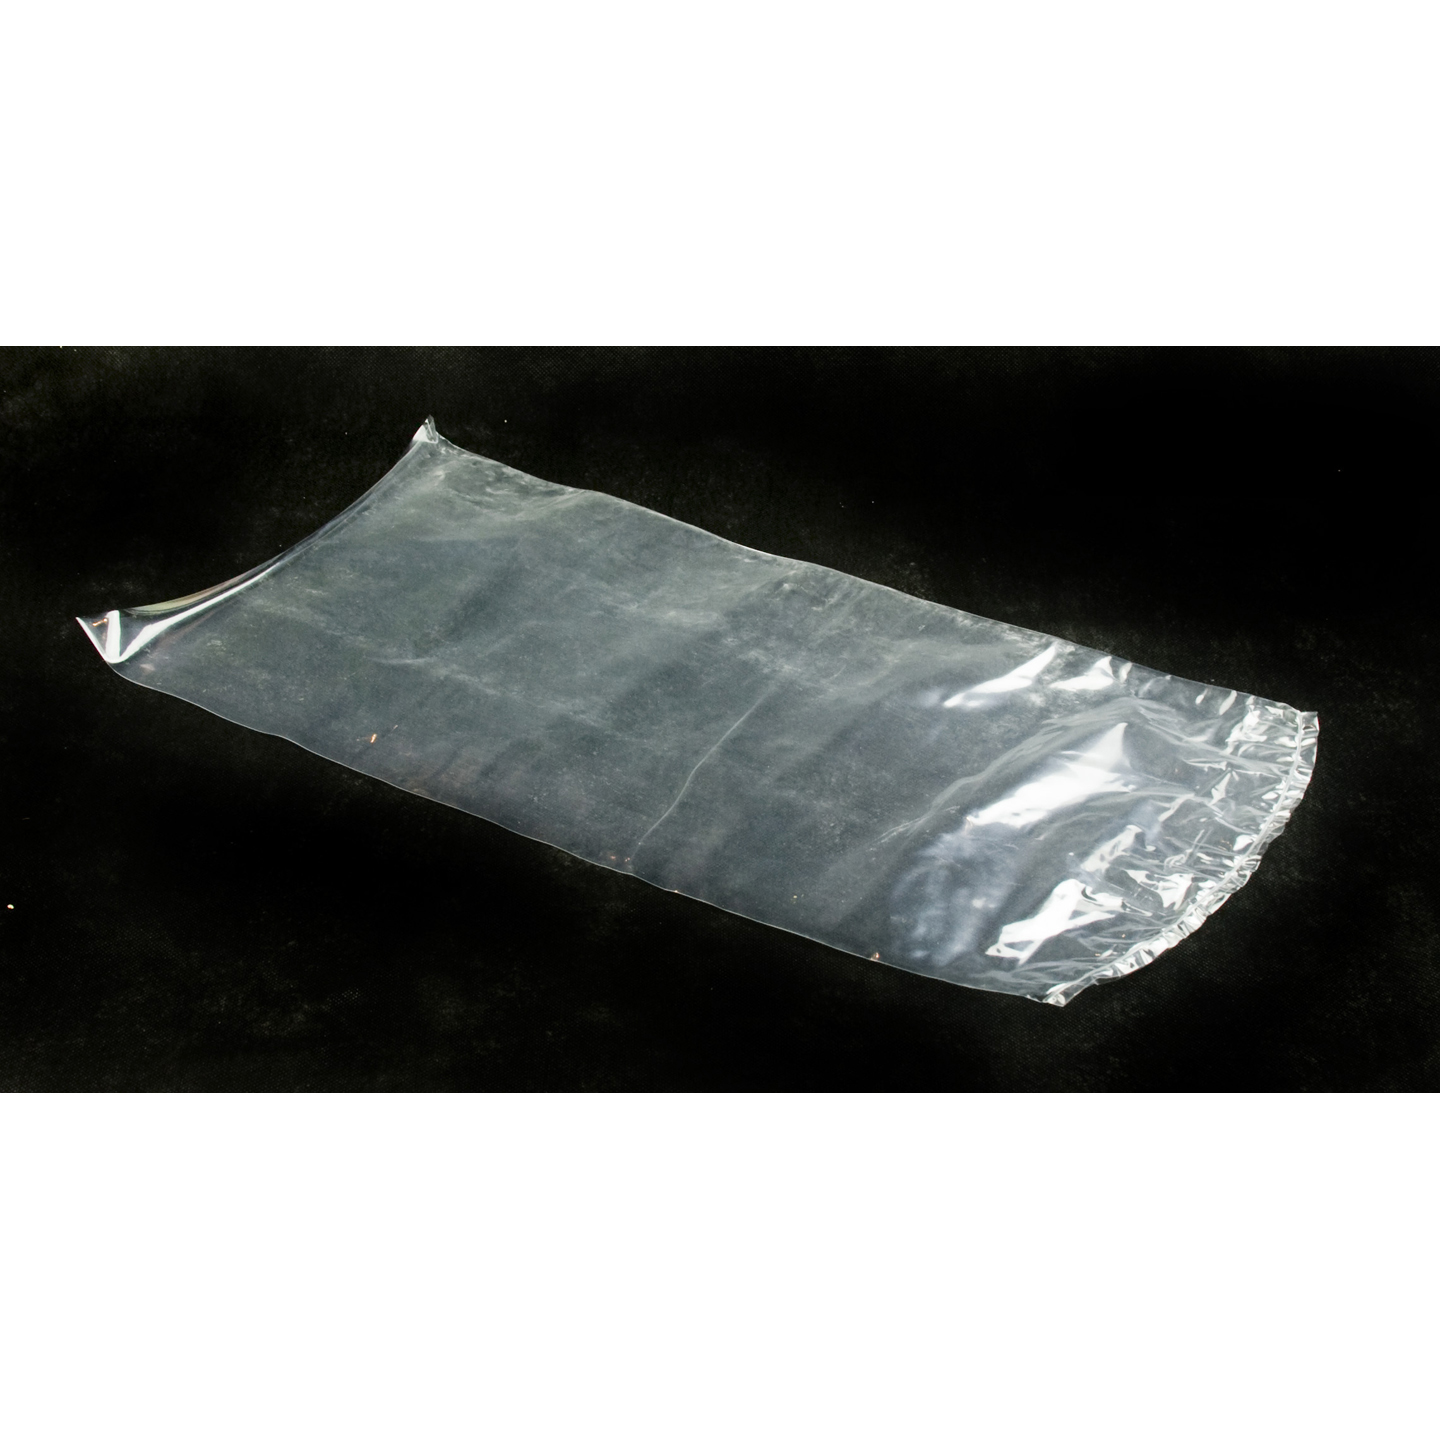 POULTRY SHRINK BAGS 10 X 16 + FREE ZIP TIES FREEZER SAFE MADE IN